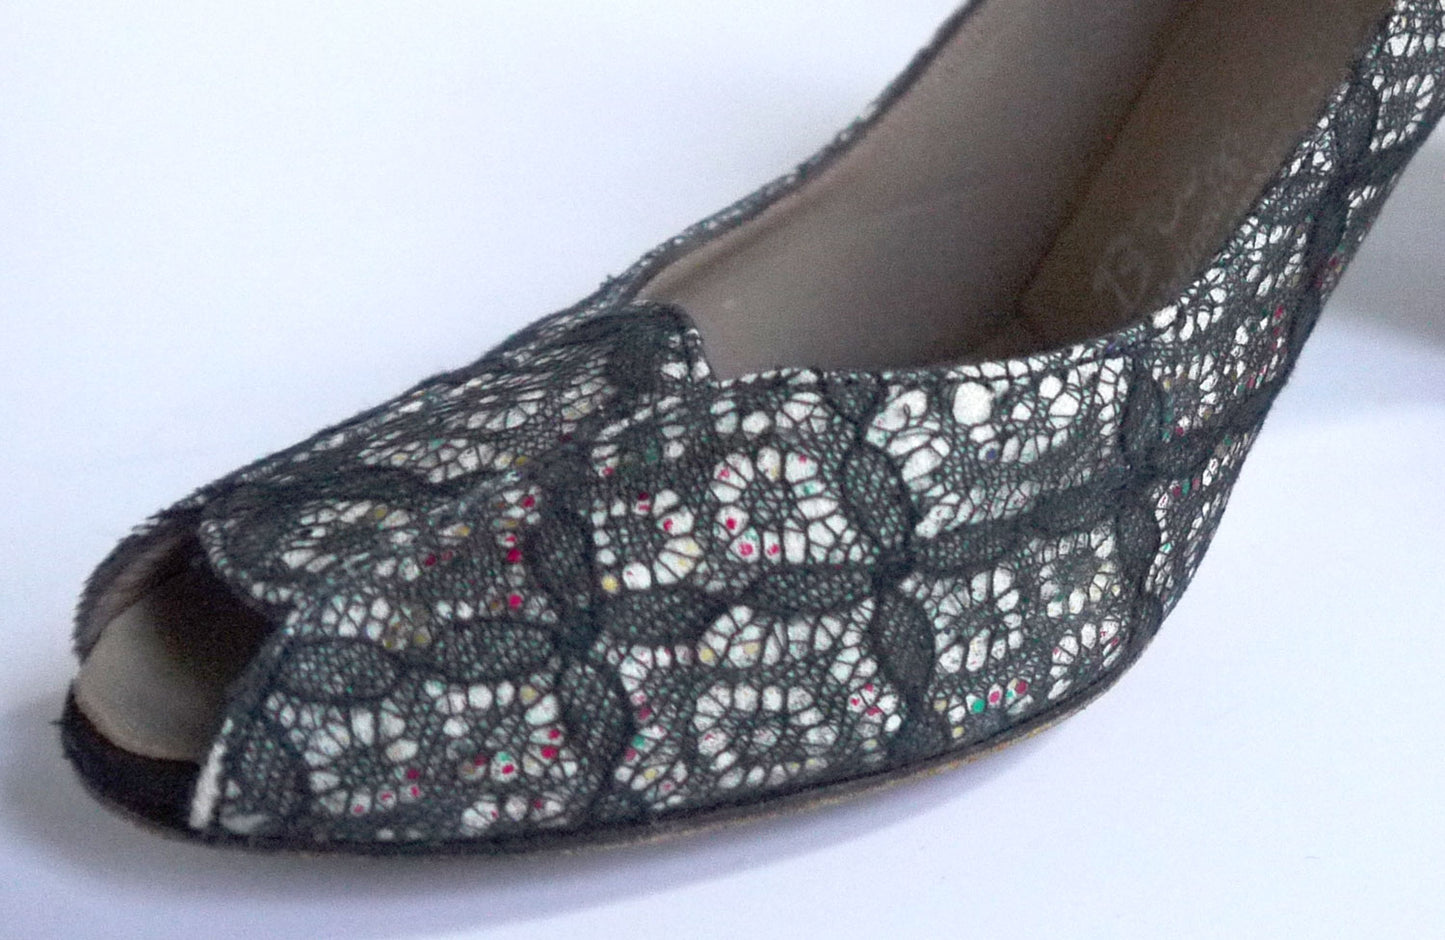 1950s Lace and Glitter Peep Toe Pumps Shoes by Van Dal UK 3.5